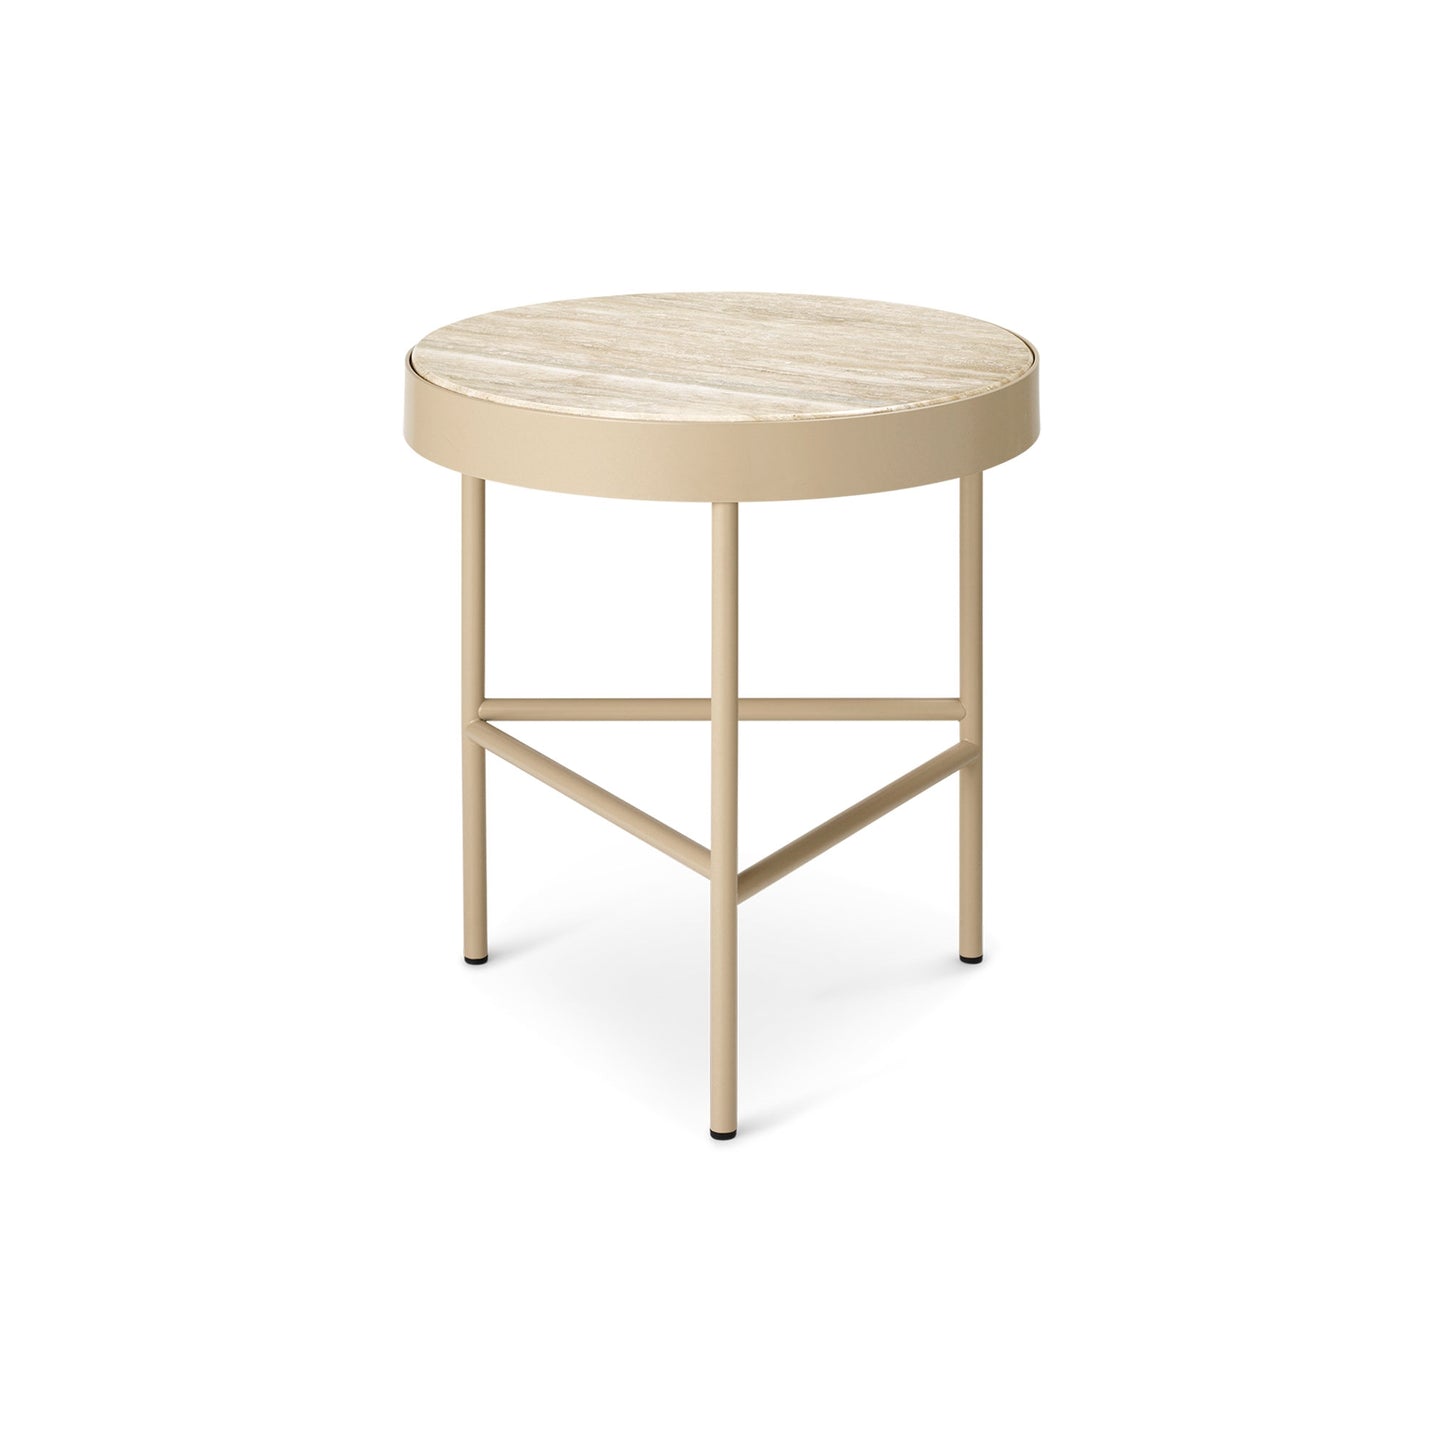 Travertine Coffee Table by Ferm Living #Cashmere